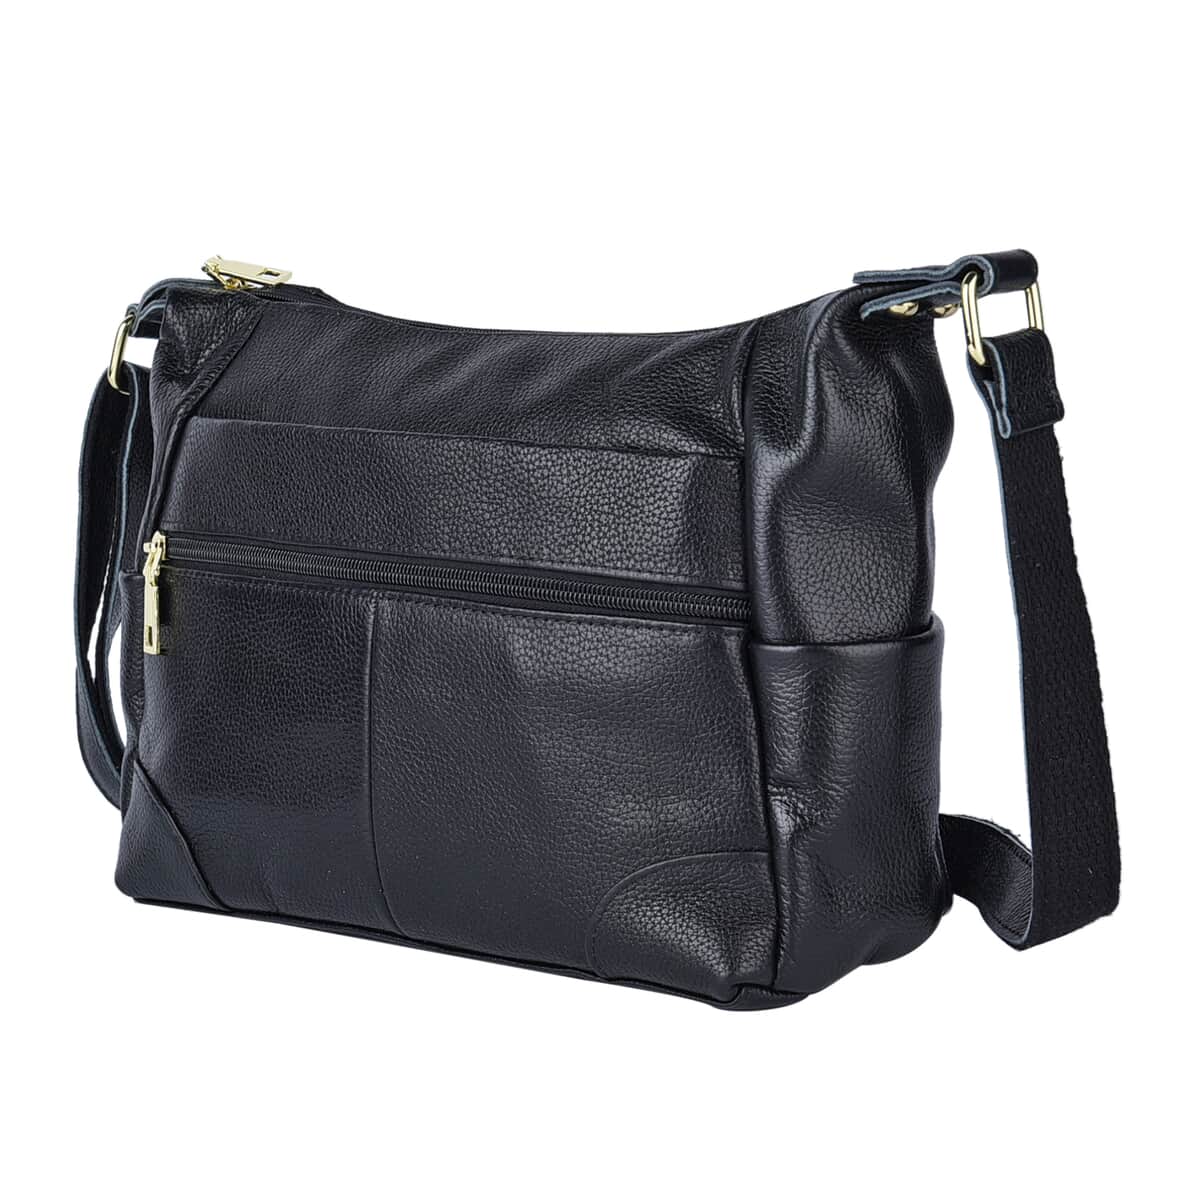 PASSAGE Black Genuine Leather Crossbody Bag (11.41"x3.94"x8.24") with Multi Pockets & 46 Inches Adjustable Shoulder Strap image number 5